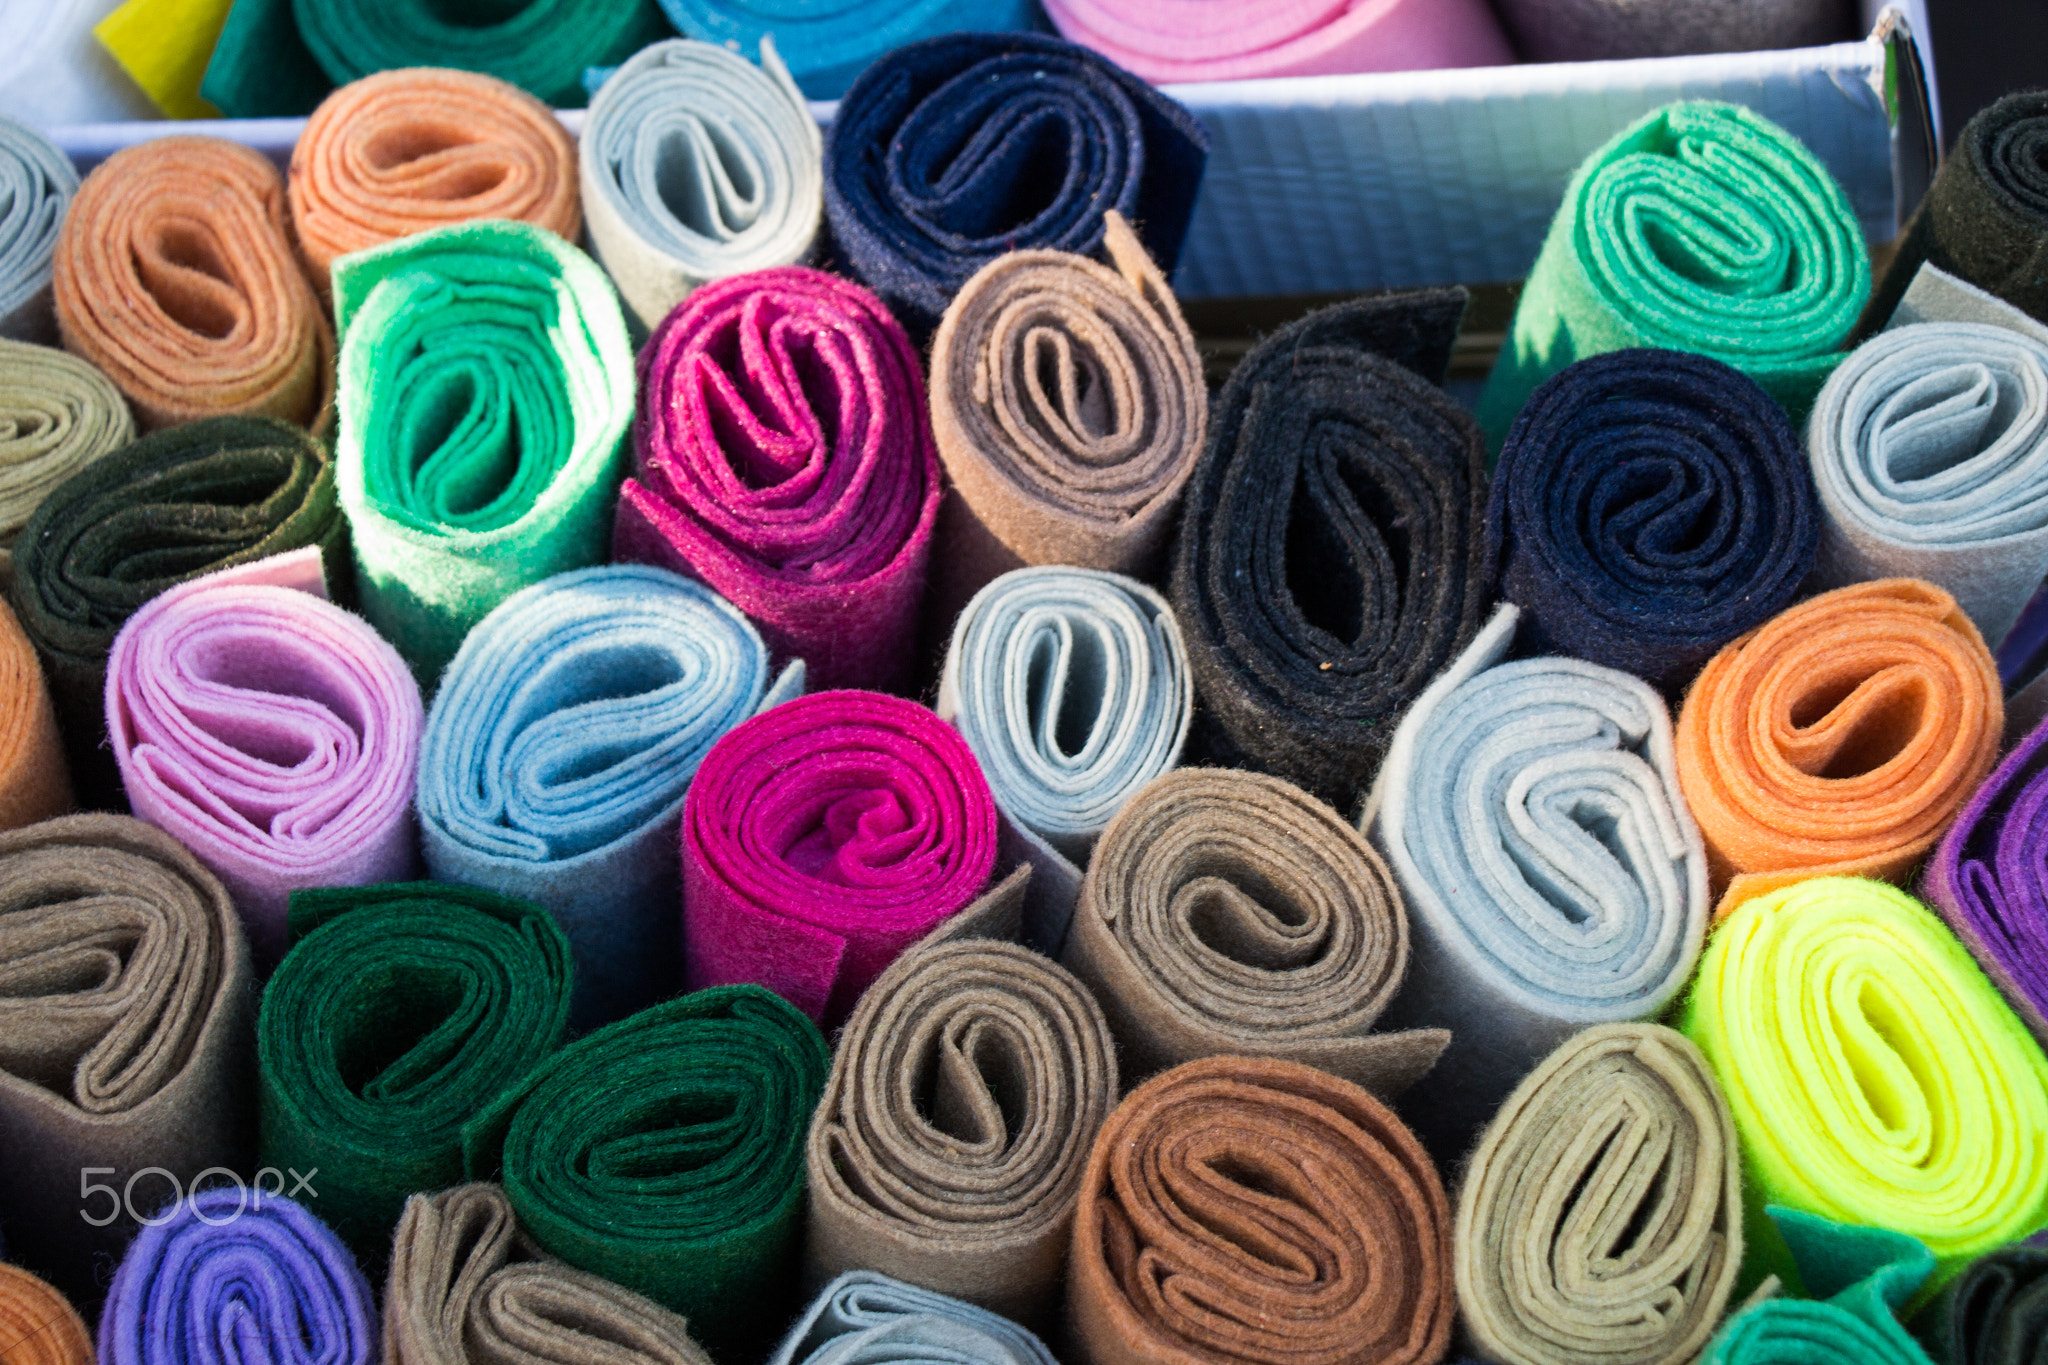 Dozens of colorful fabric rolls in display